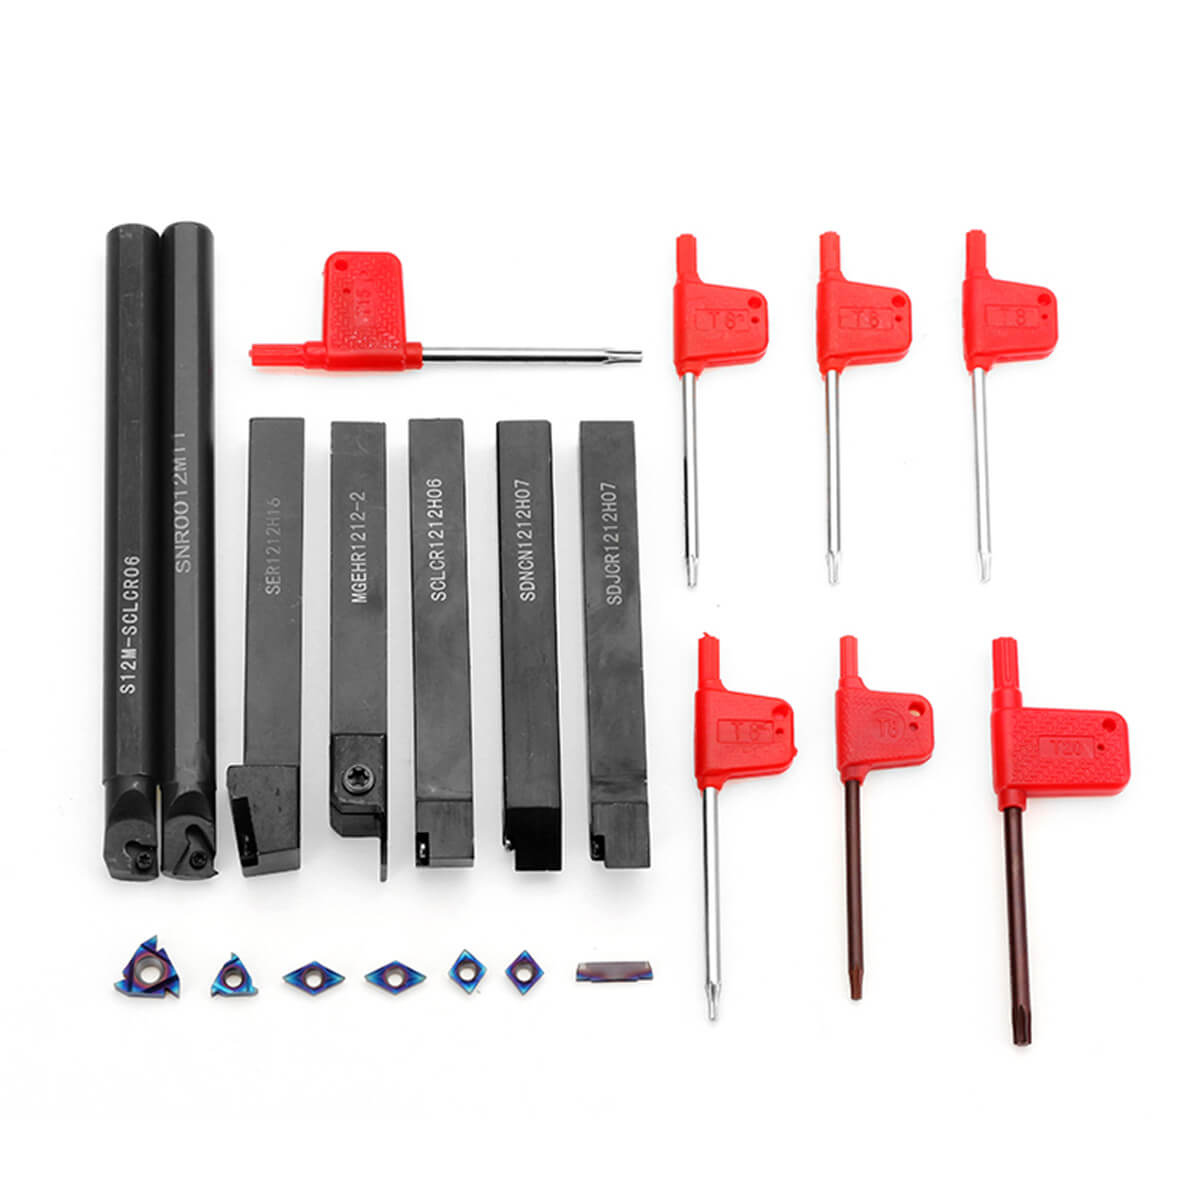 Drillpro 7Pcs 12mm shank Lathe Turning Tool Holder Boring Bar With DCMT CCMT Carbide Insert